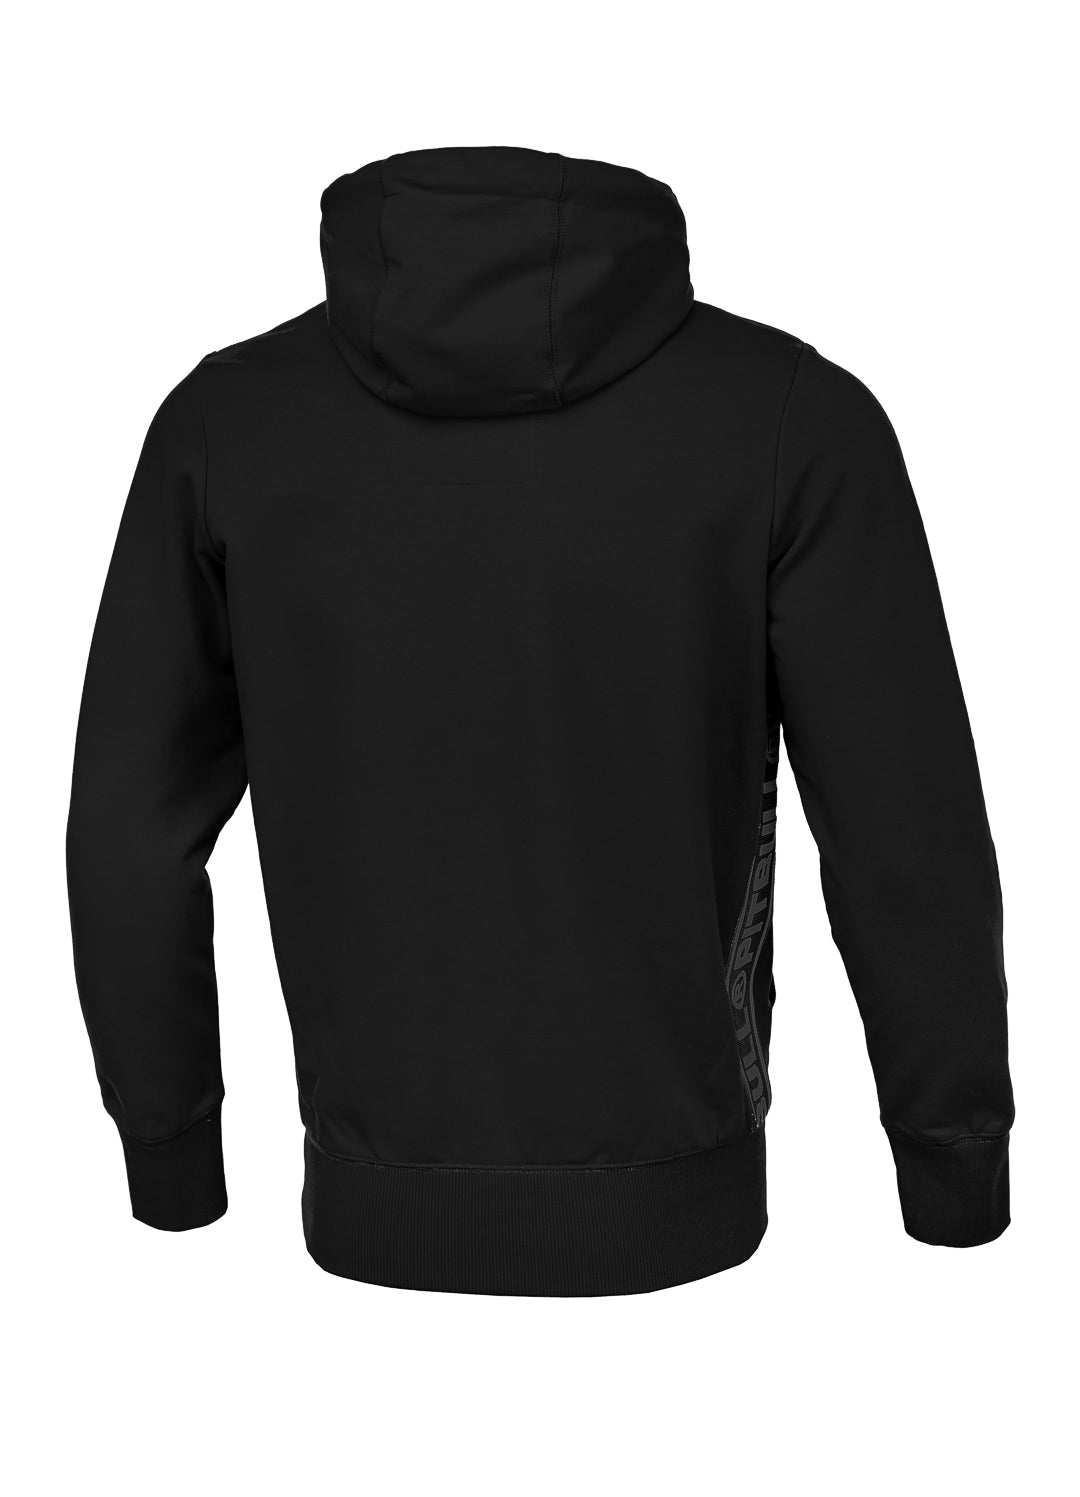 HINSON French Terry Black Hoodie